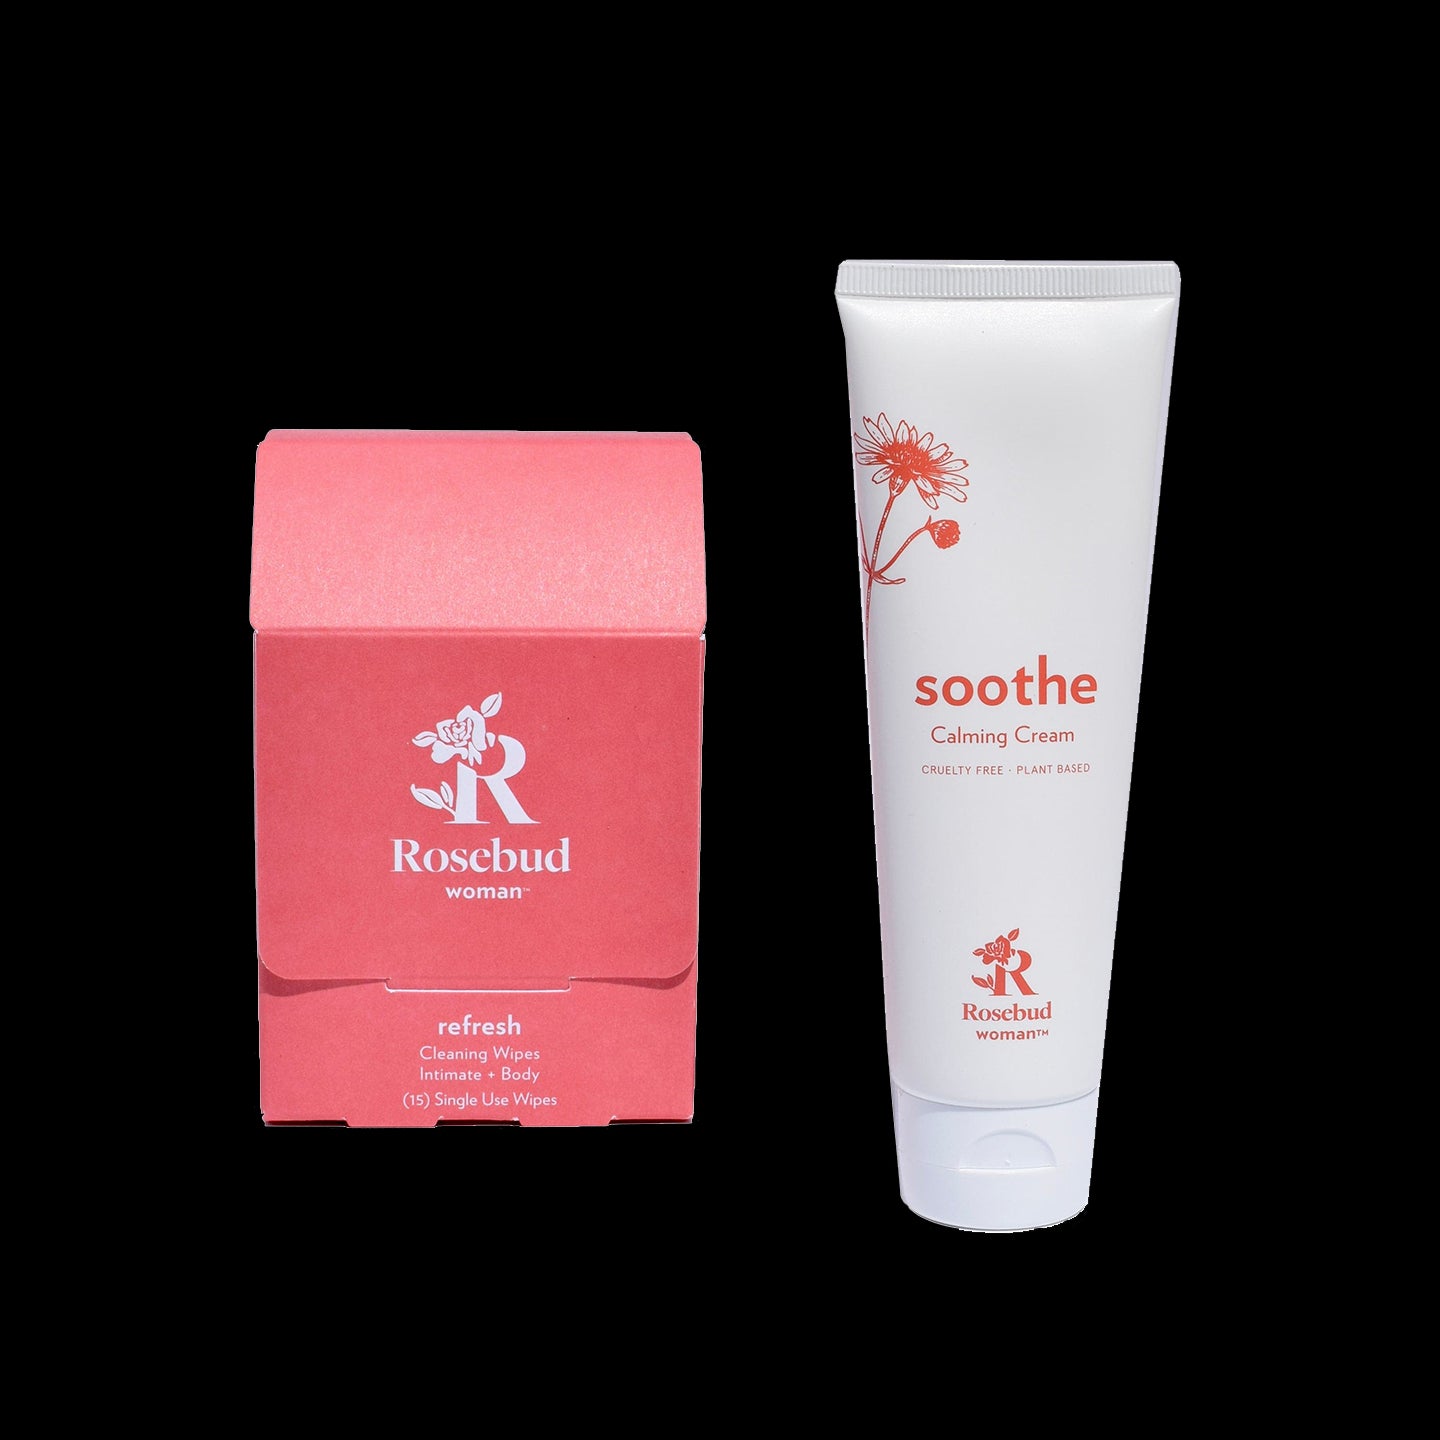 Soothe Calming Cream & Refresh Cleansing Wipes Bundle